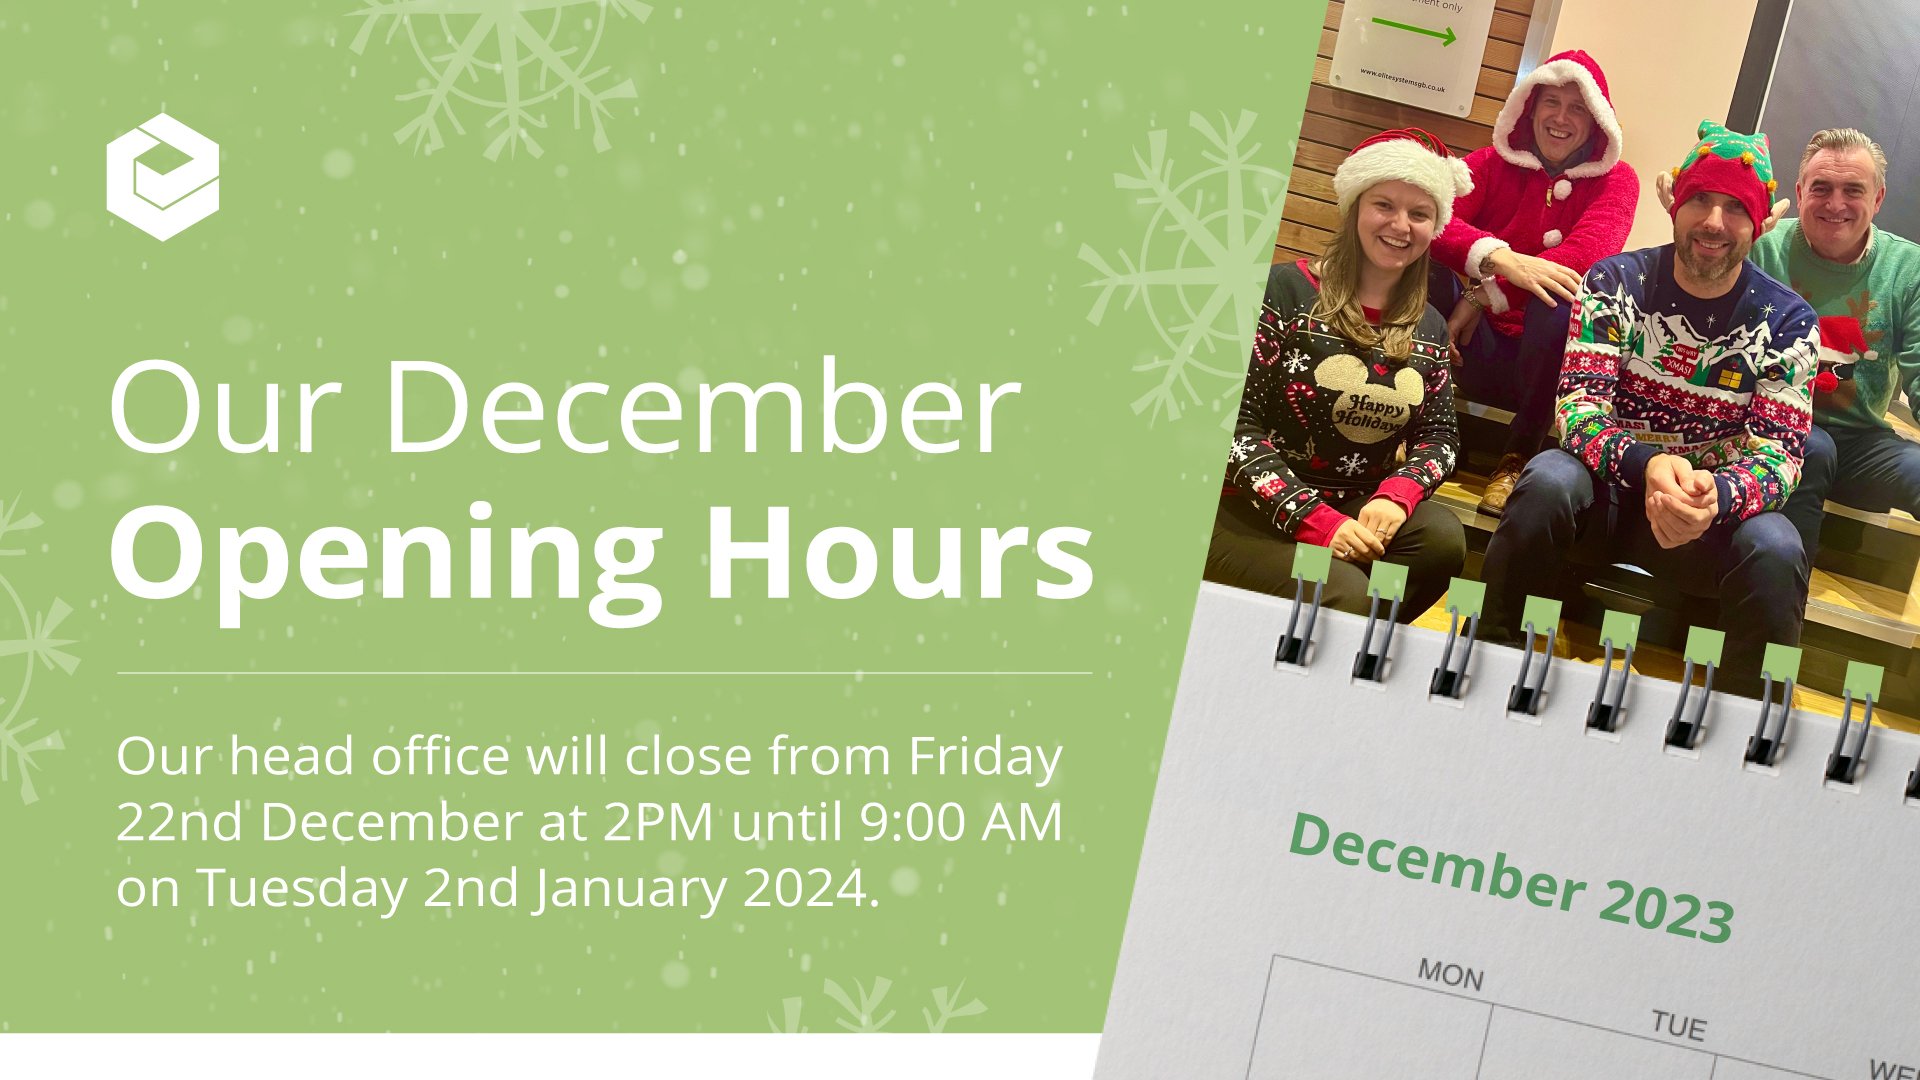 image shows Elite System's office opening hours over Christmastime